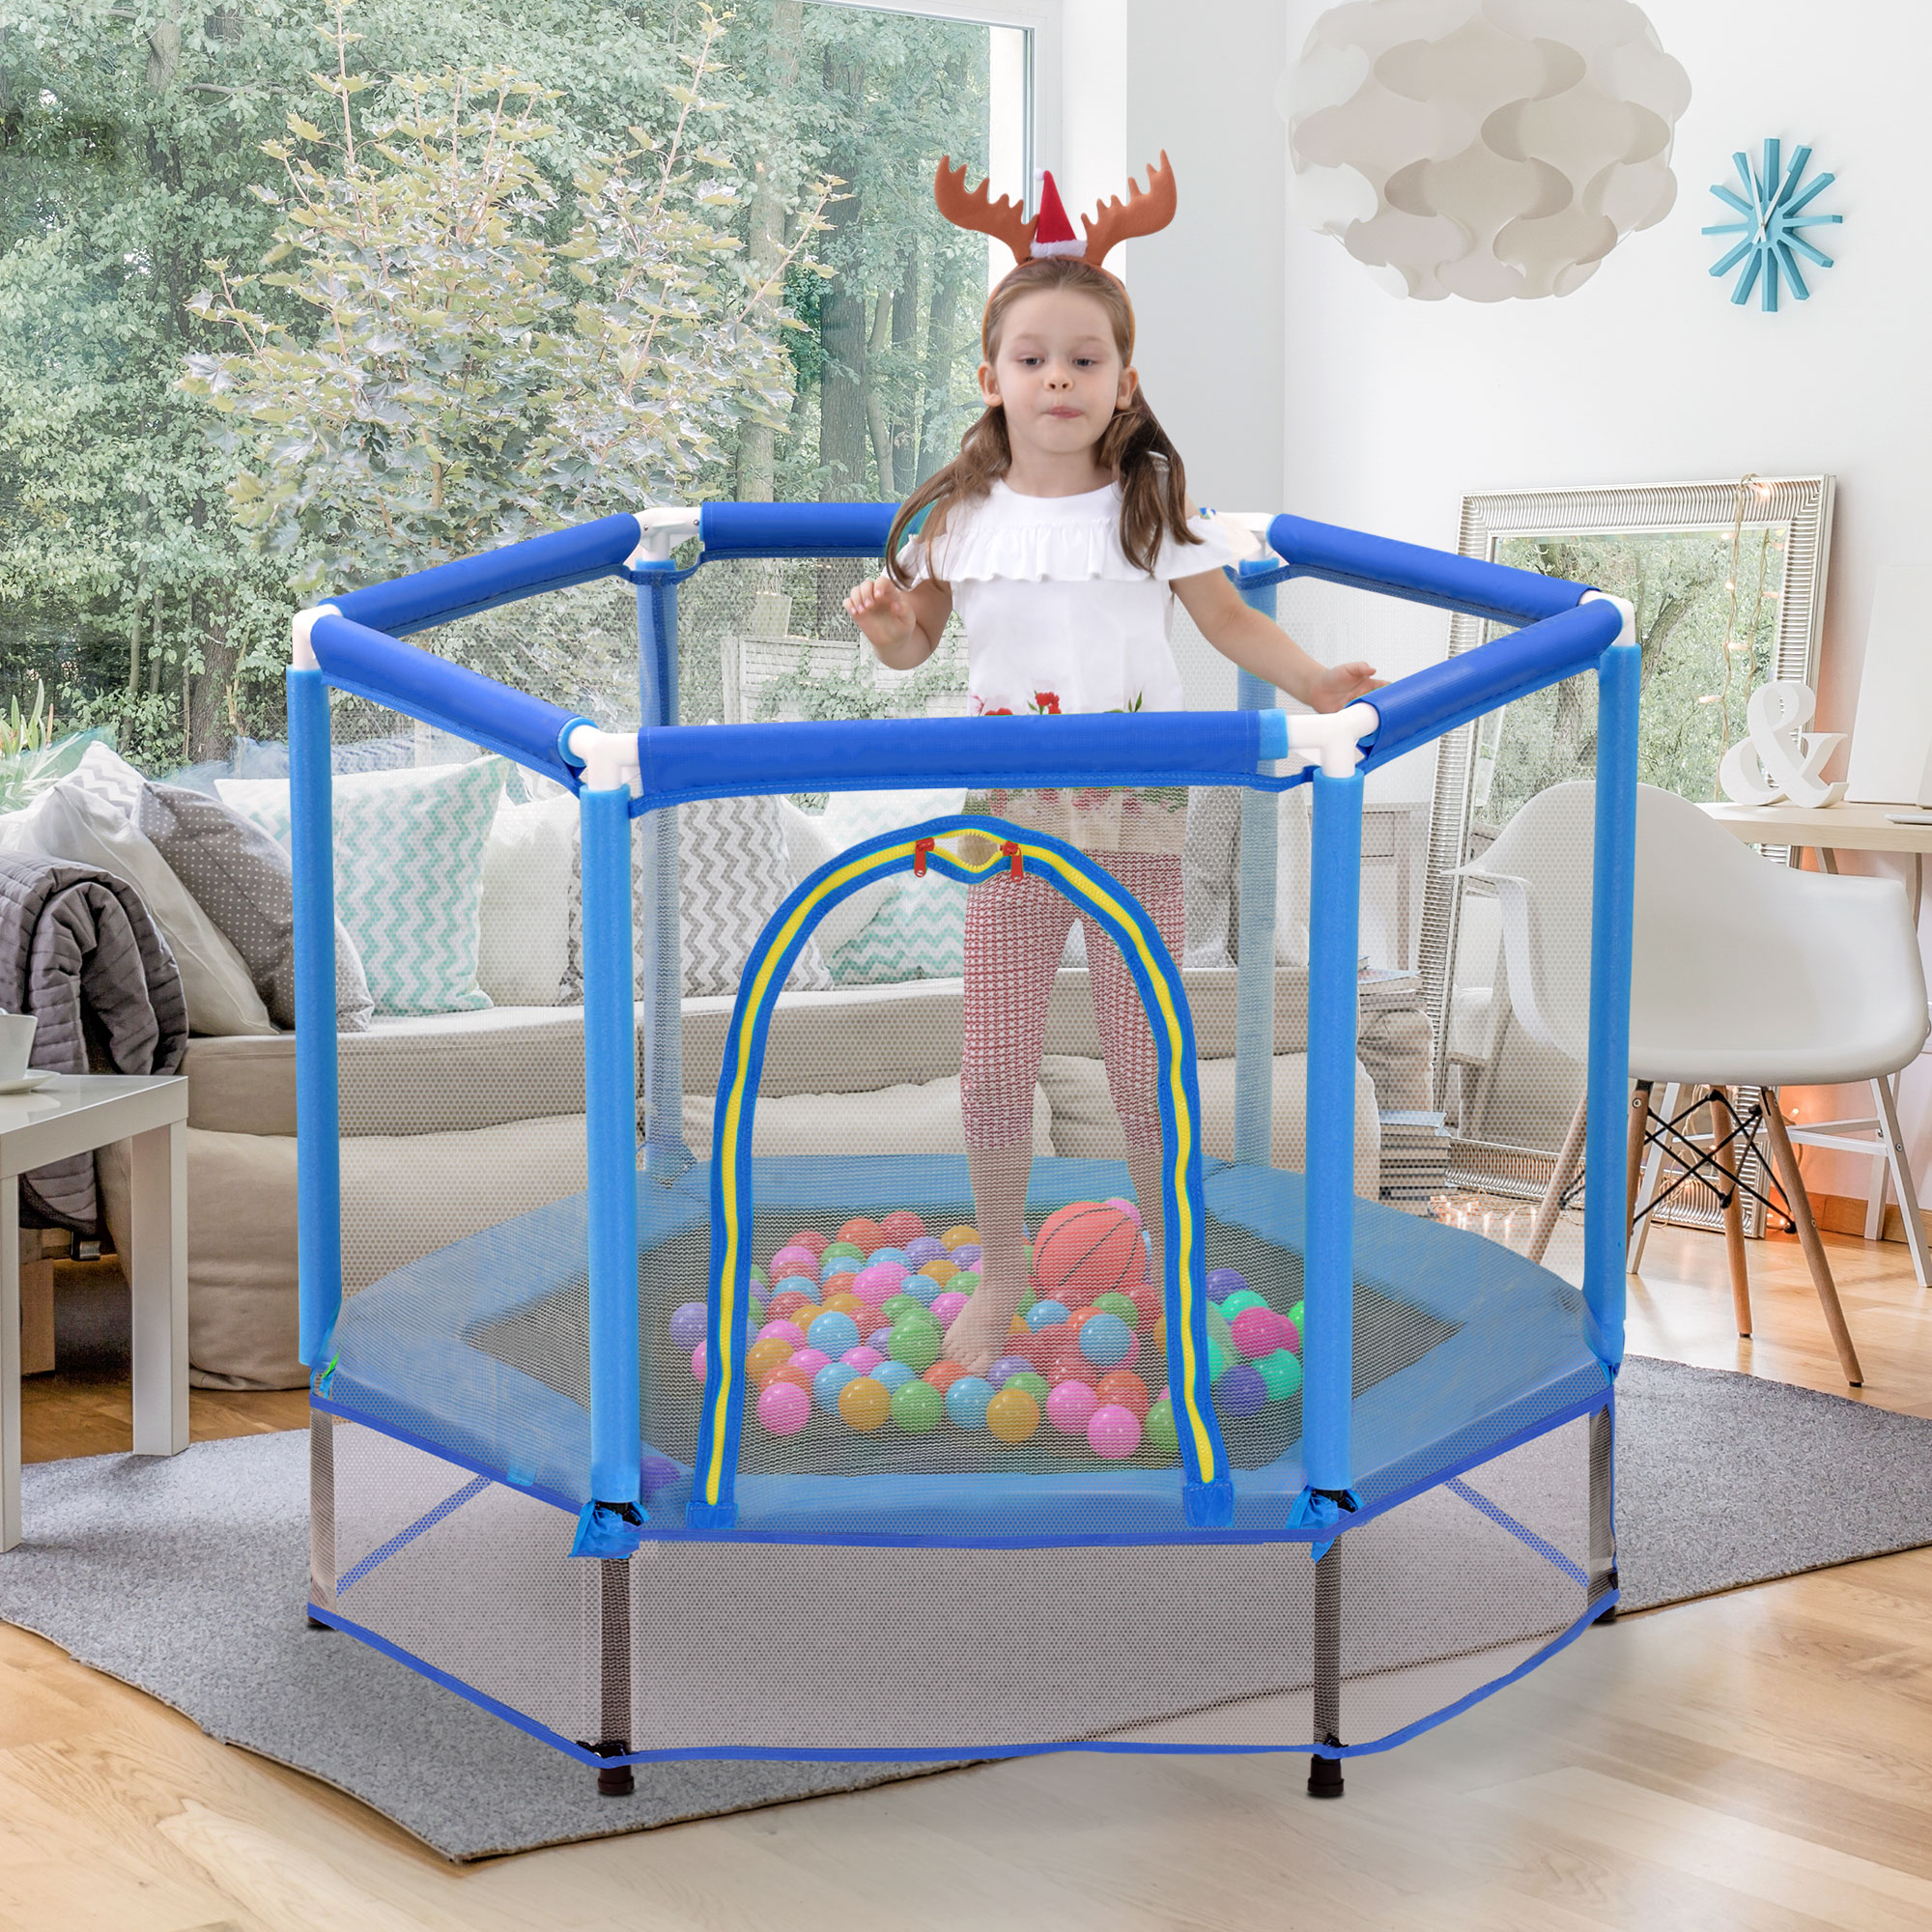 55&rdquo; Toddlers Trampoline with Safety Enclosure Net and Balls, Indoor Outdoor Mini Trampoline for Kids-CASAINC